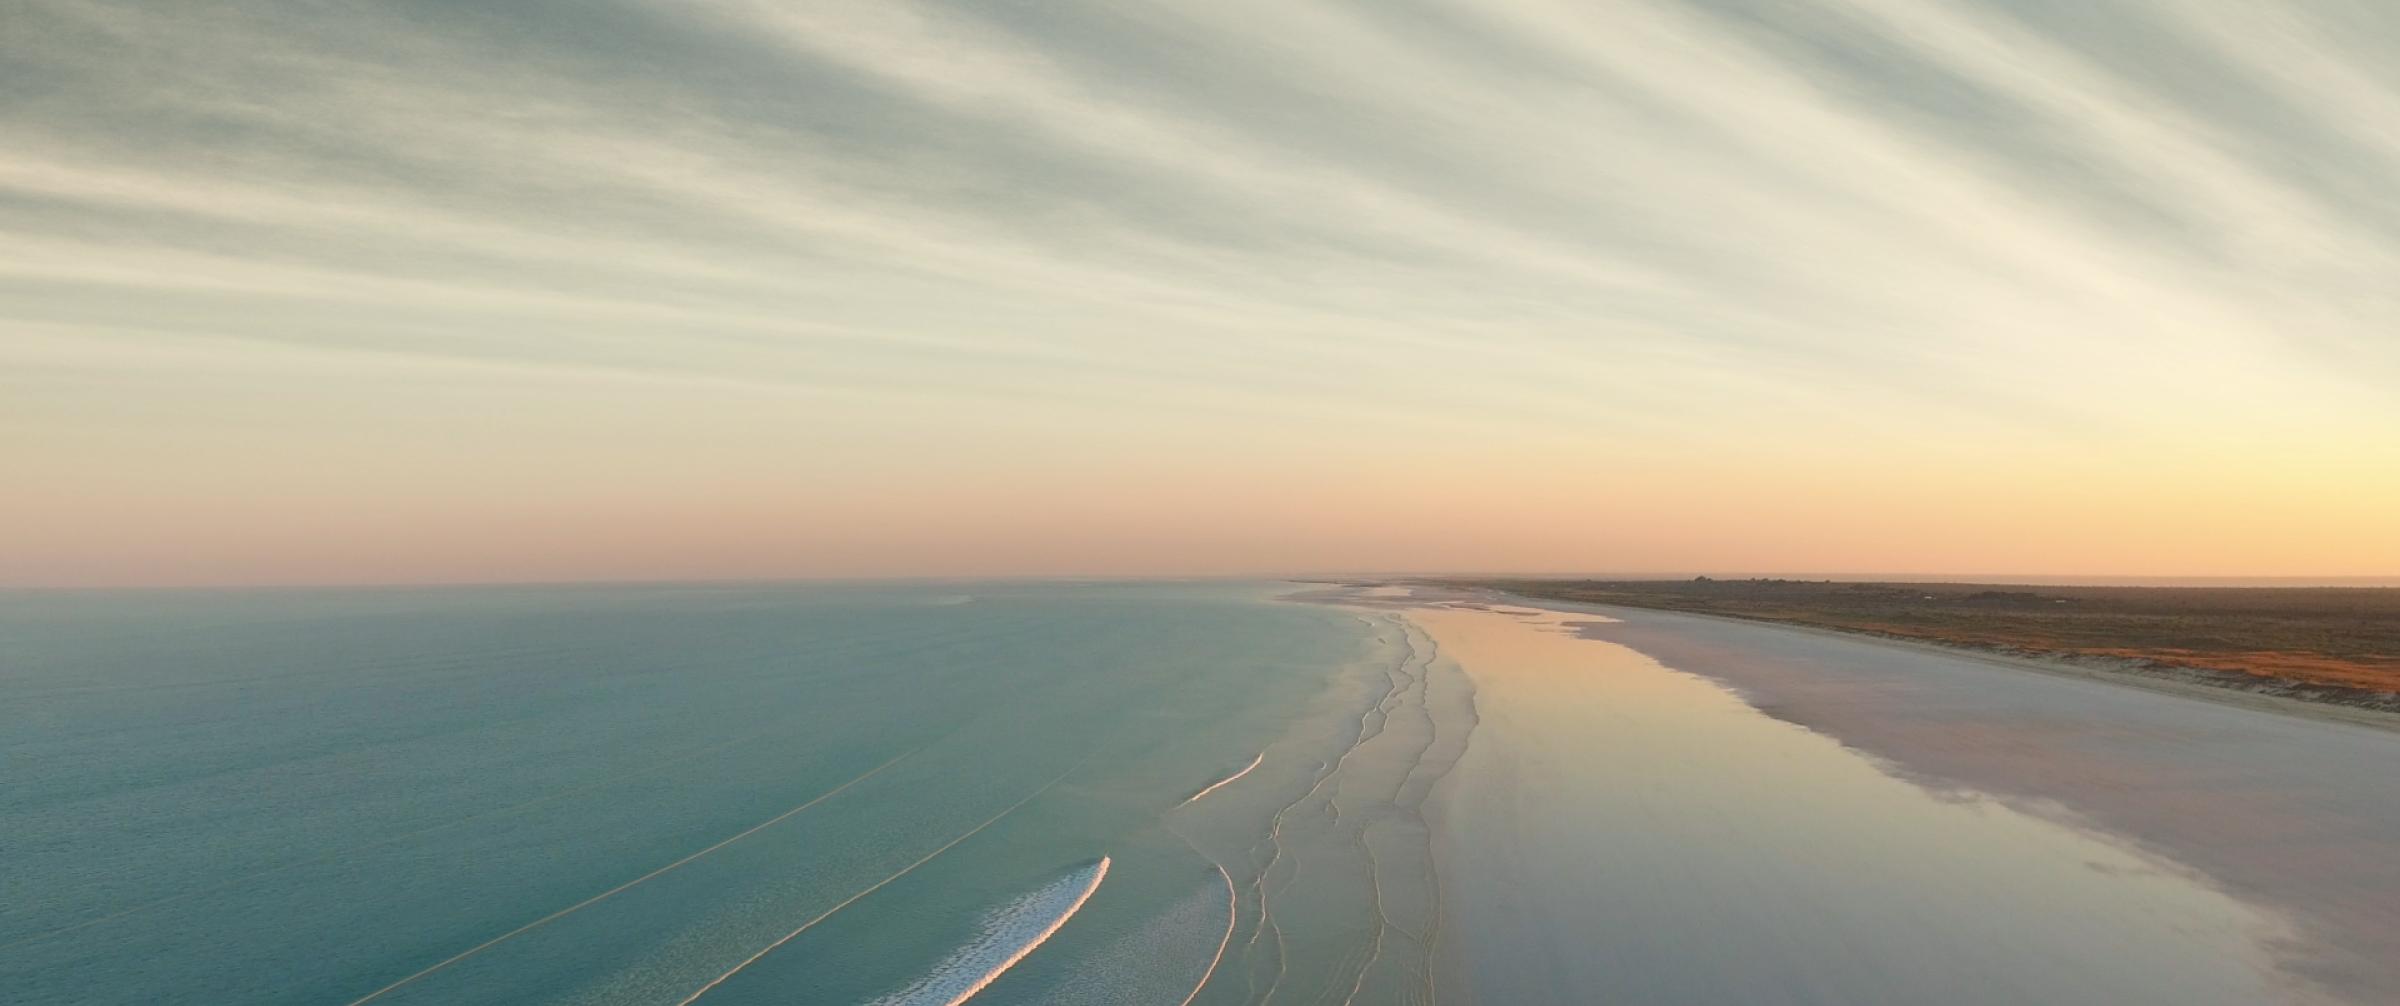 Aerial view of a beach. Inspiration for COLORBOND® steel